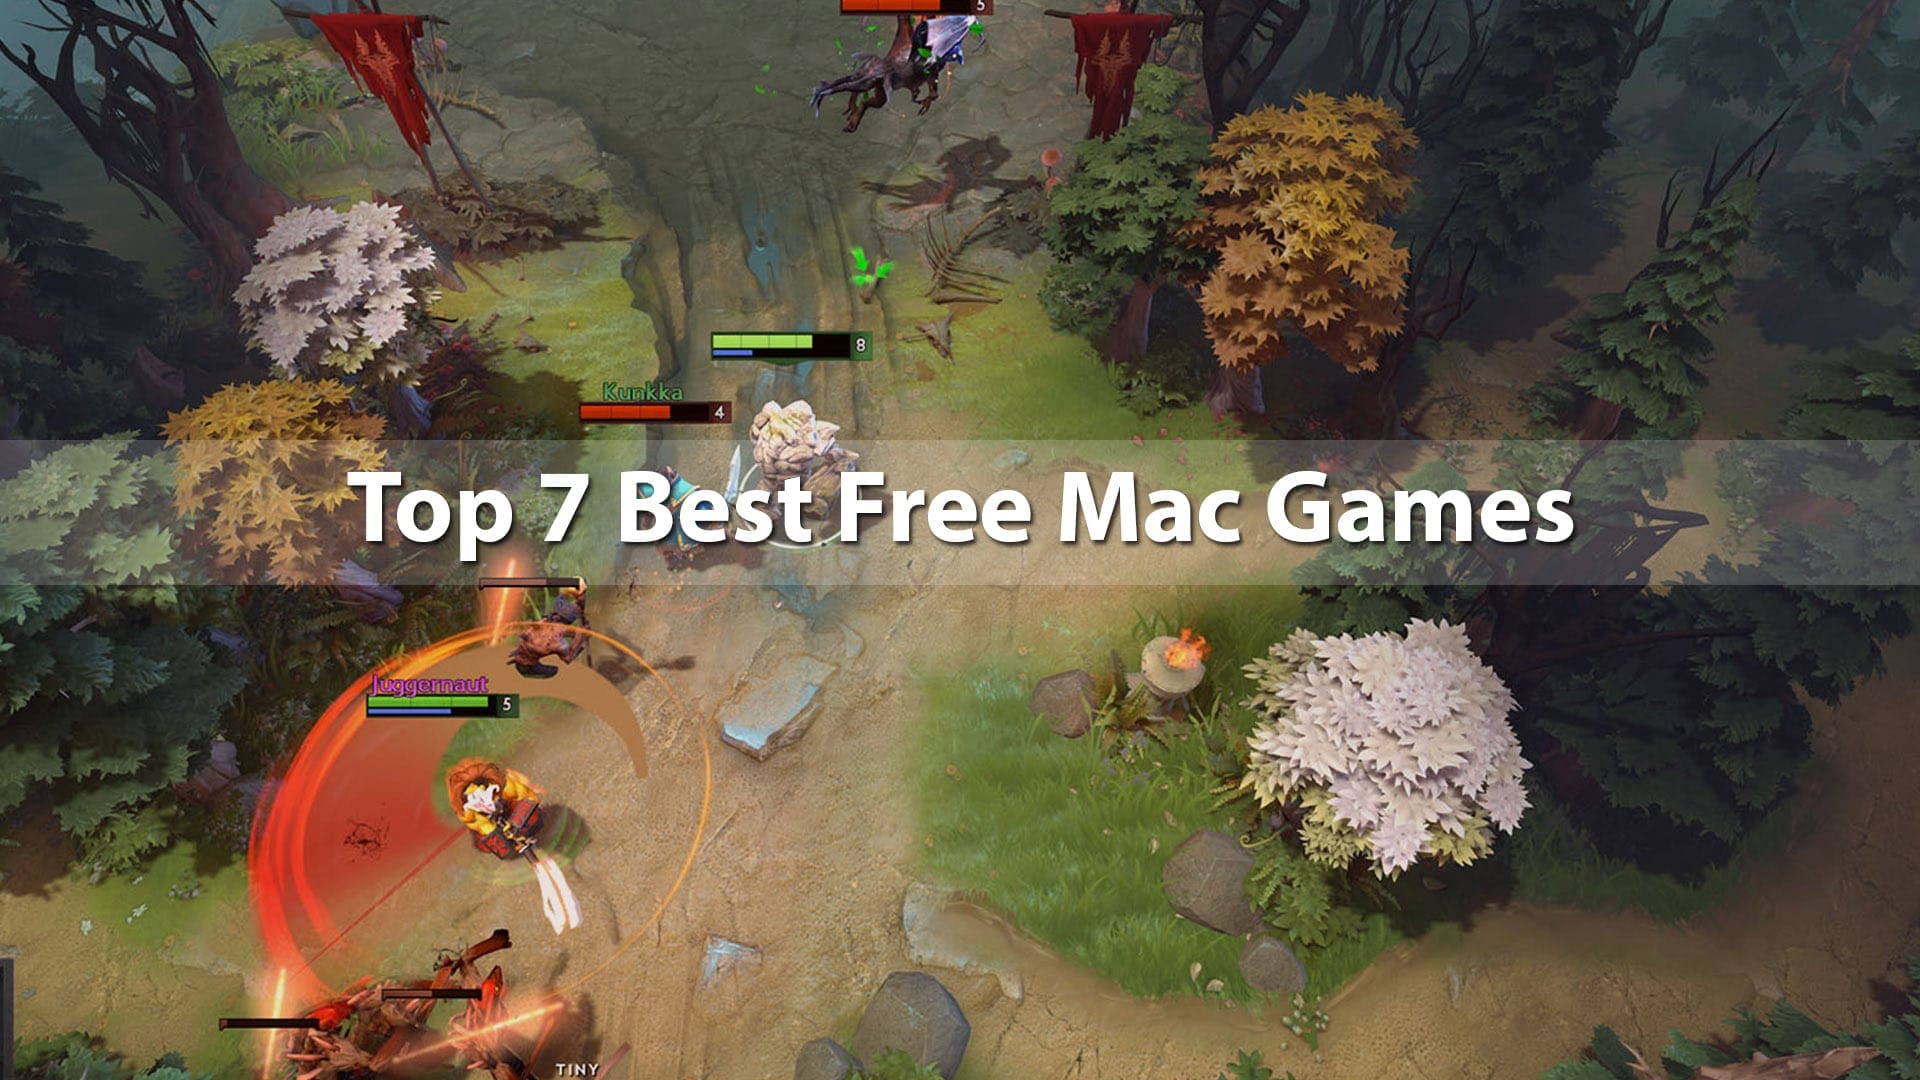 Free games for macbook pro